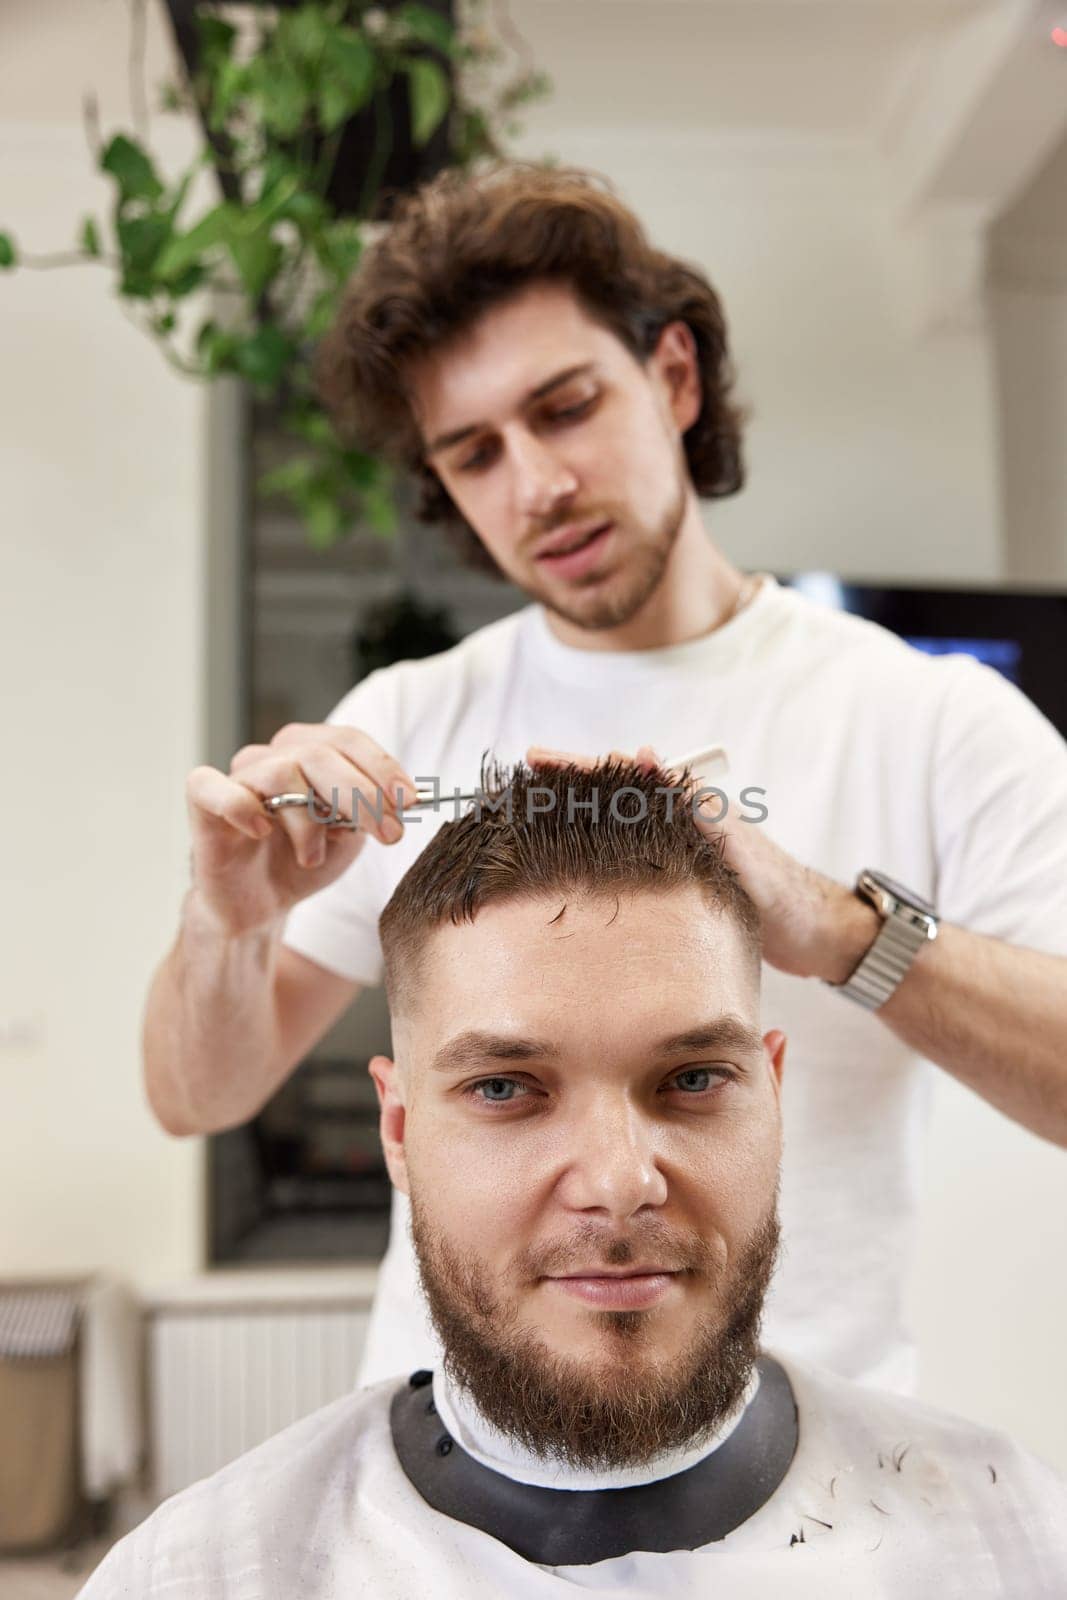 hairdresser does haircut for man using comb and grooming scissors by erstudio